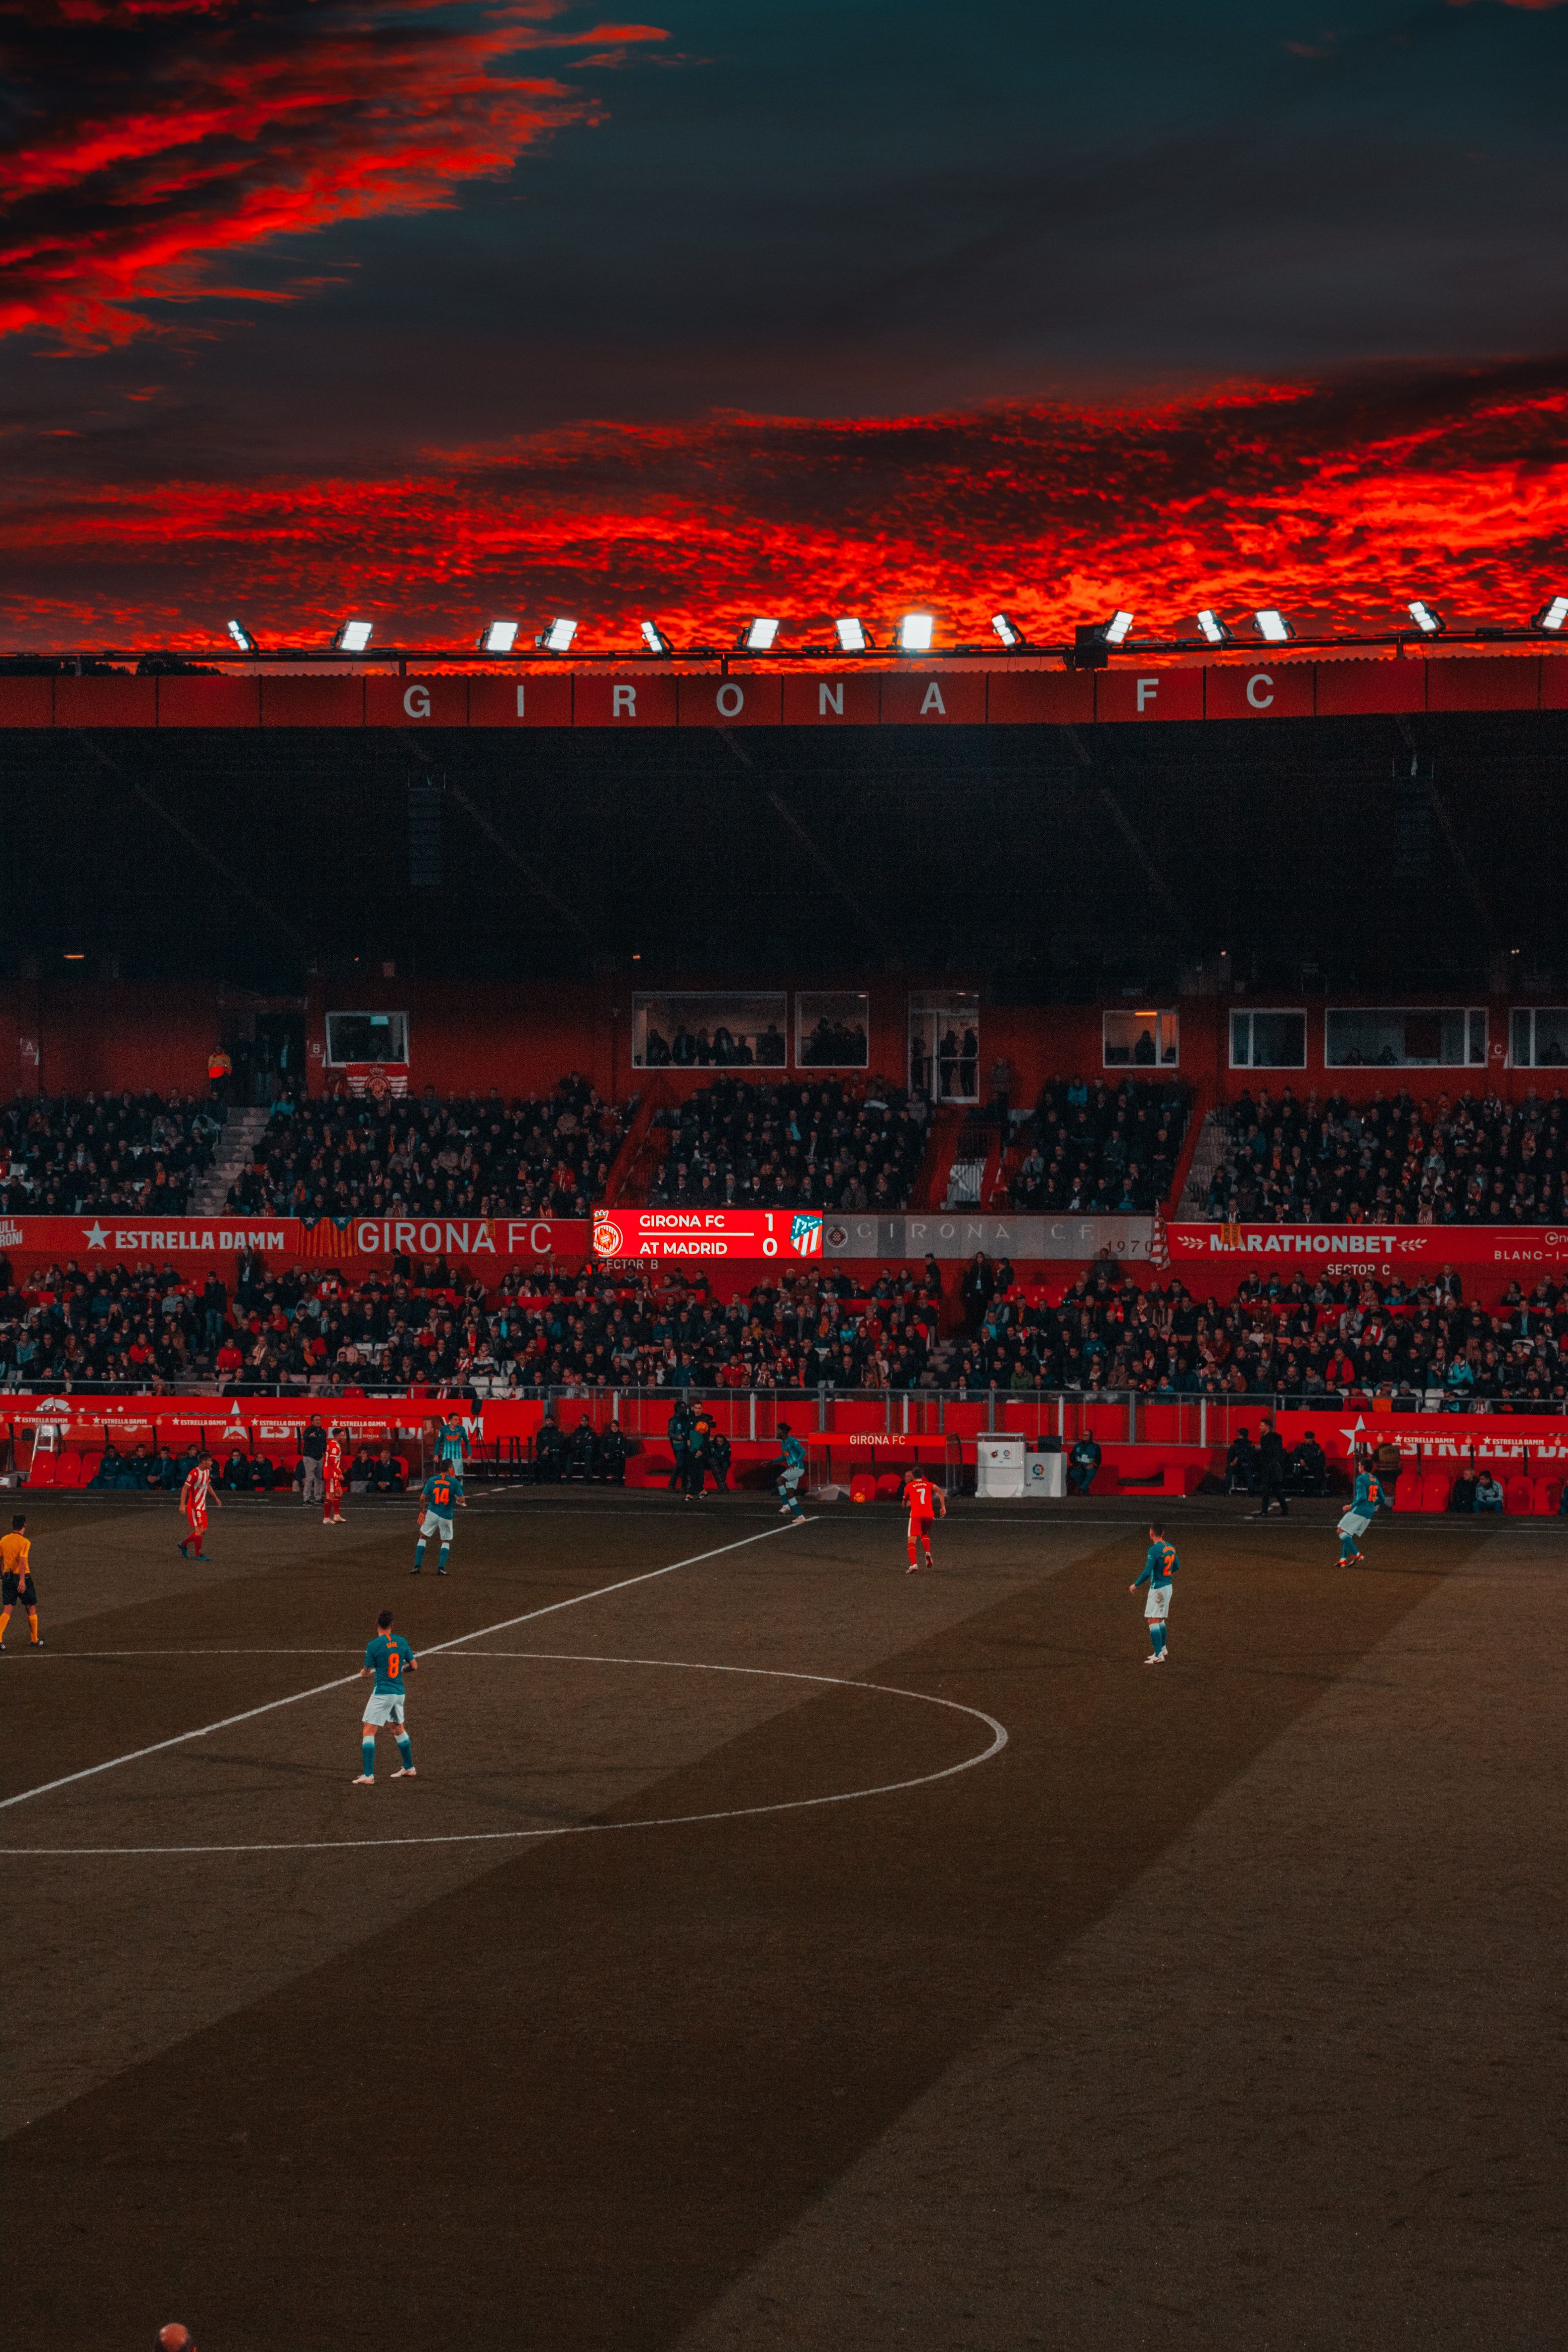 A soccer match with a red sunset in the background. - Soccer